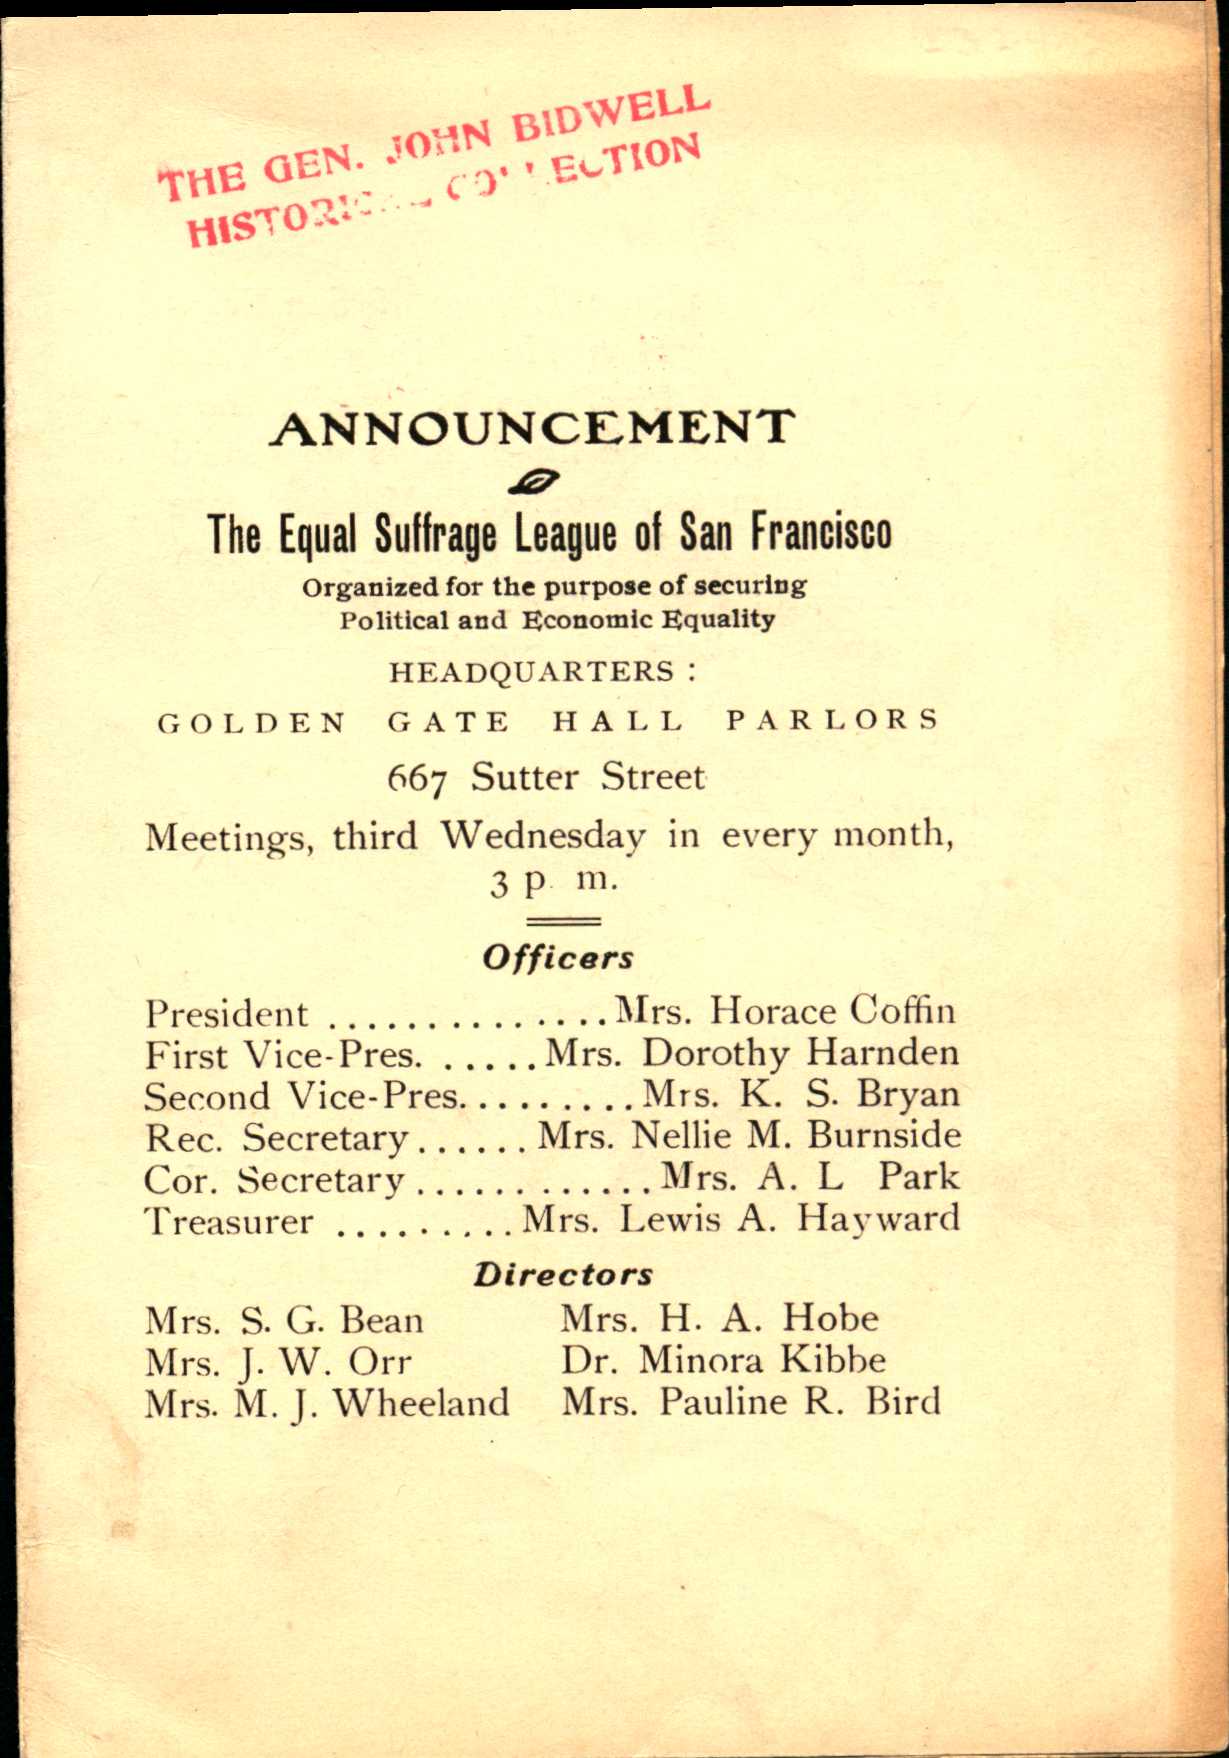 Shows information about where the Equal Suffrage League of San Francisco met and their leadership